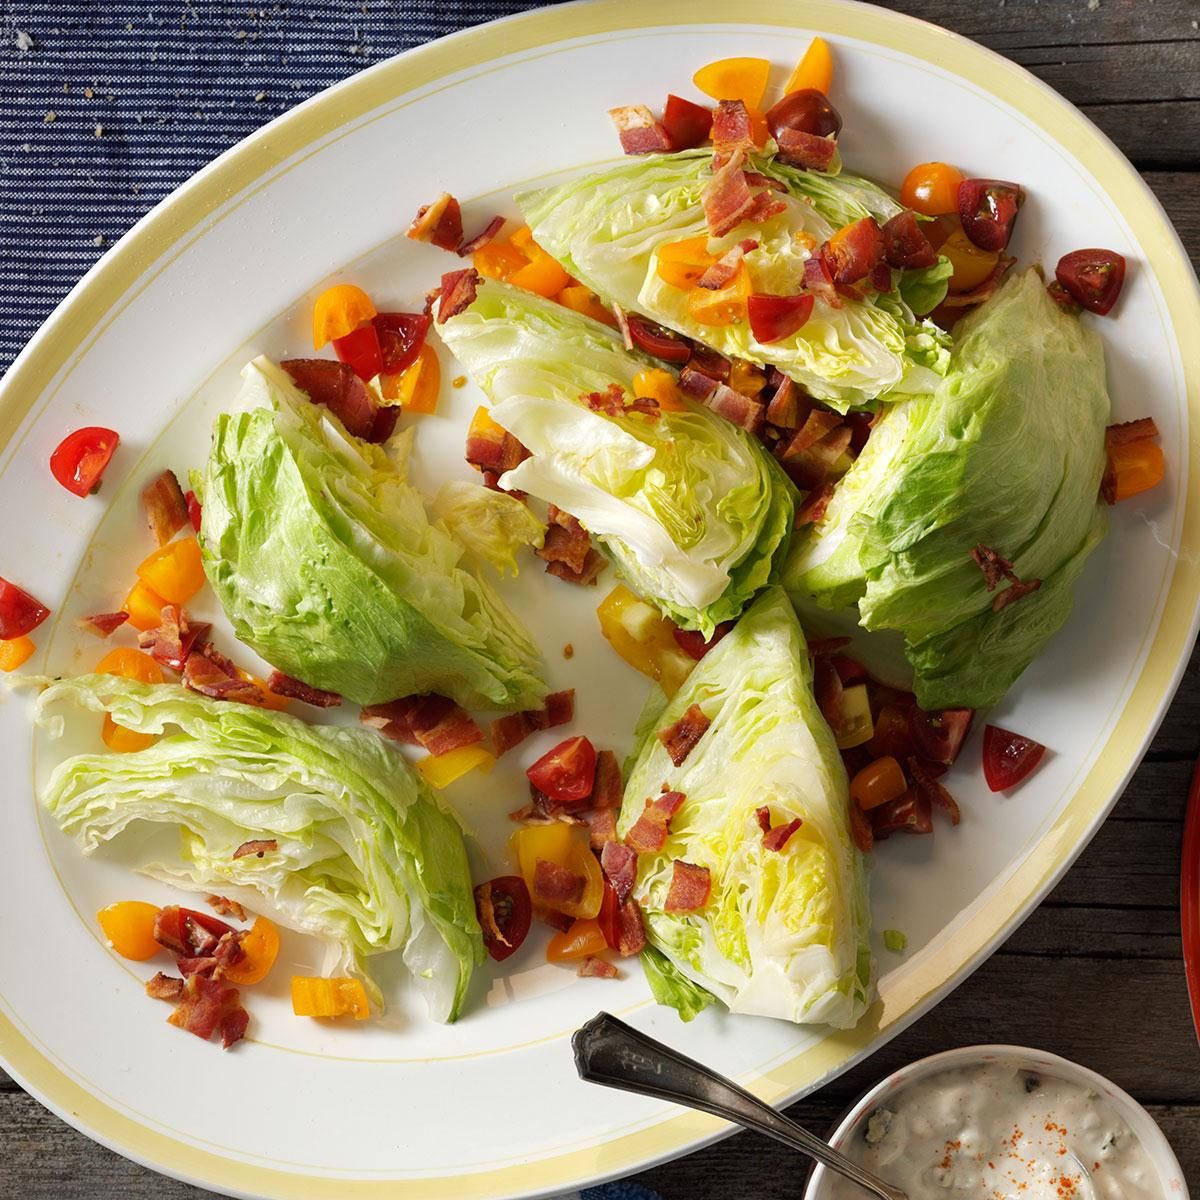 Rhode Island: Wedge Salad with Blue Cheese Dressing	